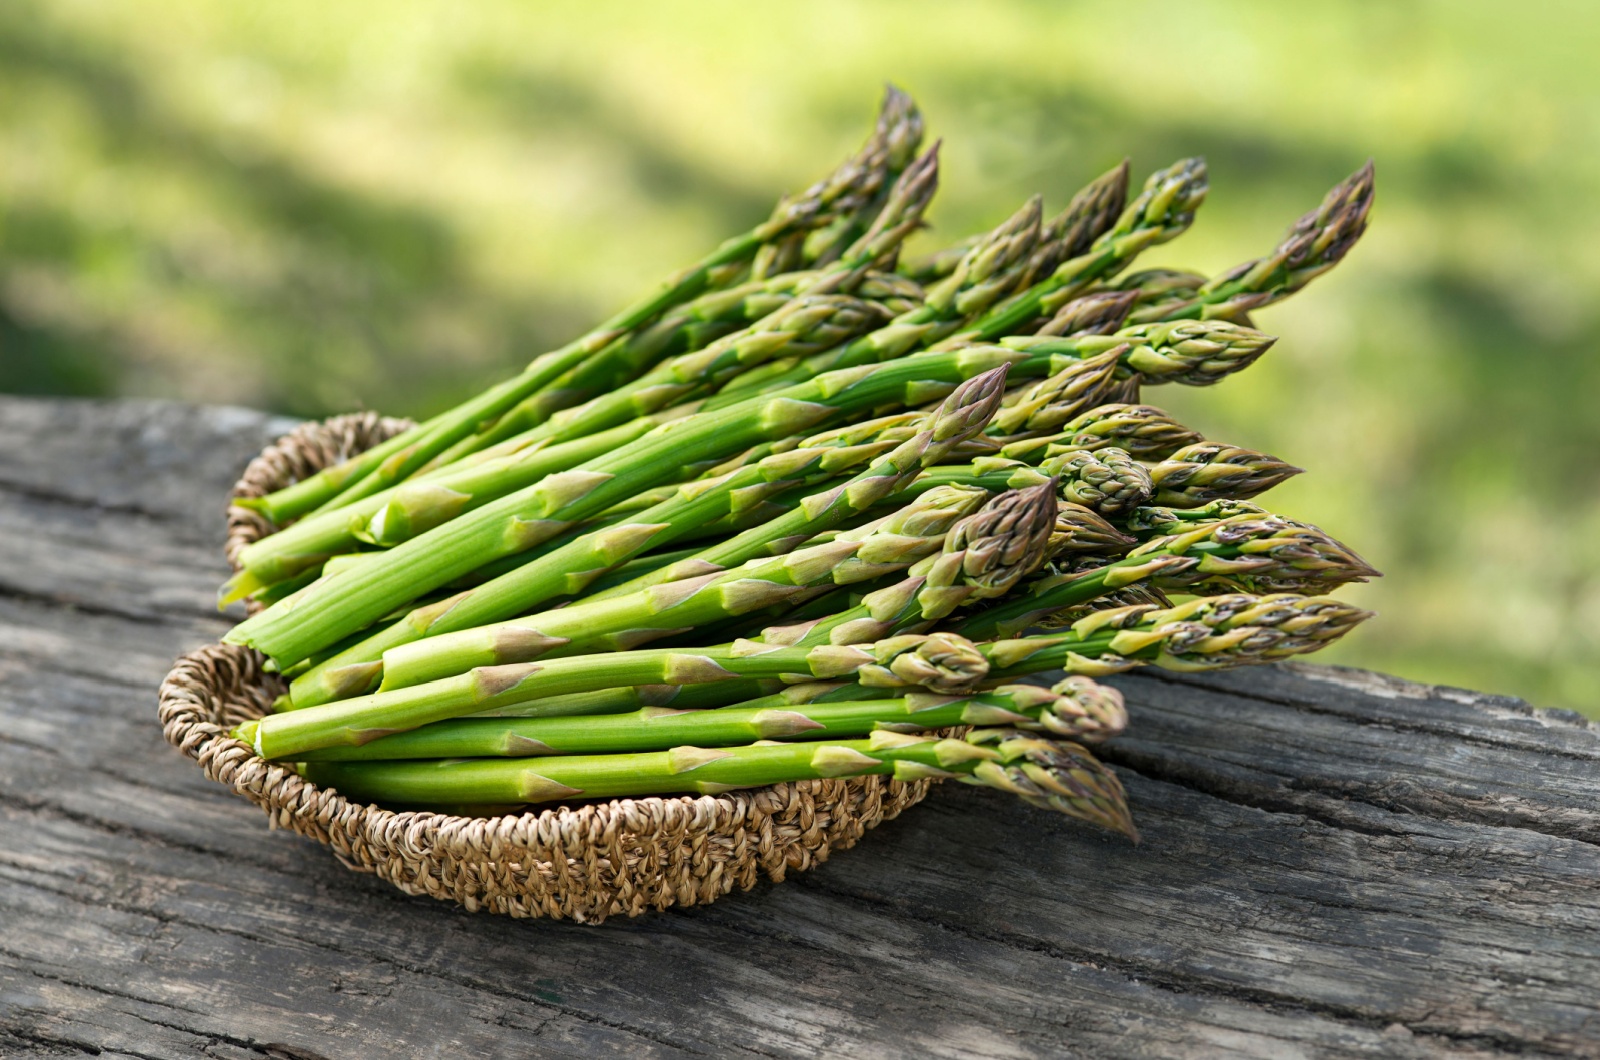 These 4 Simple Tips Will Make Growing Homemade Asparagus In Pots Possible